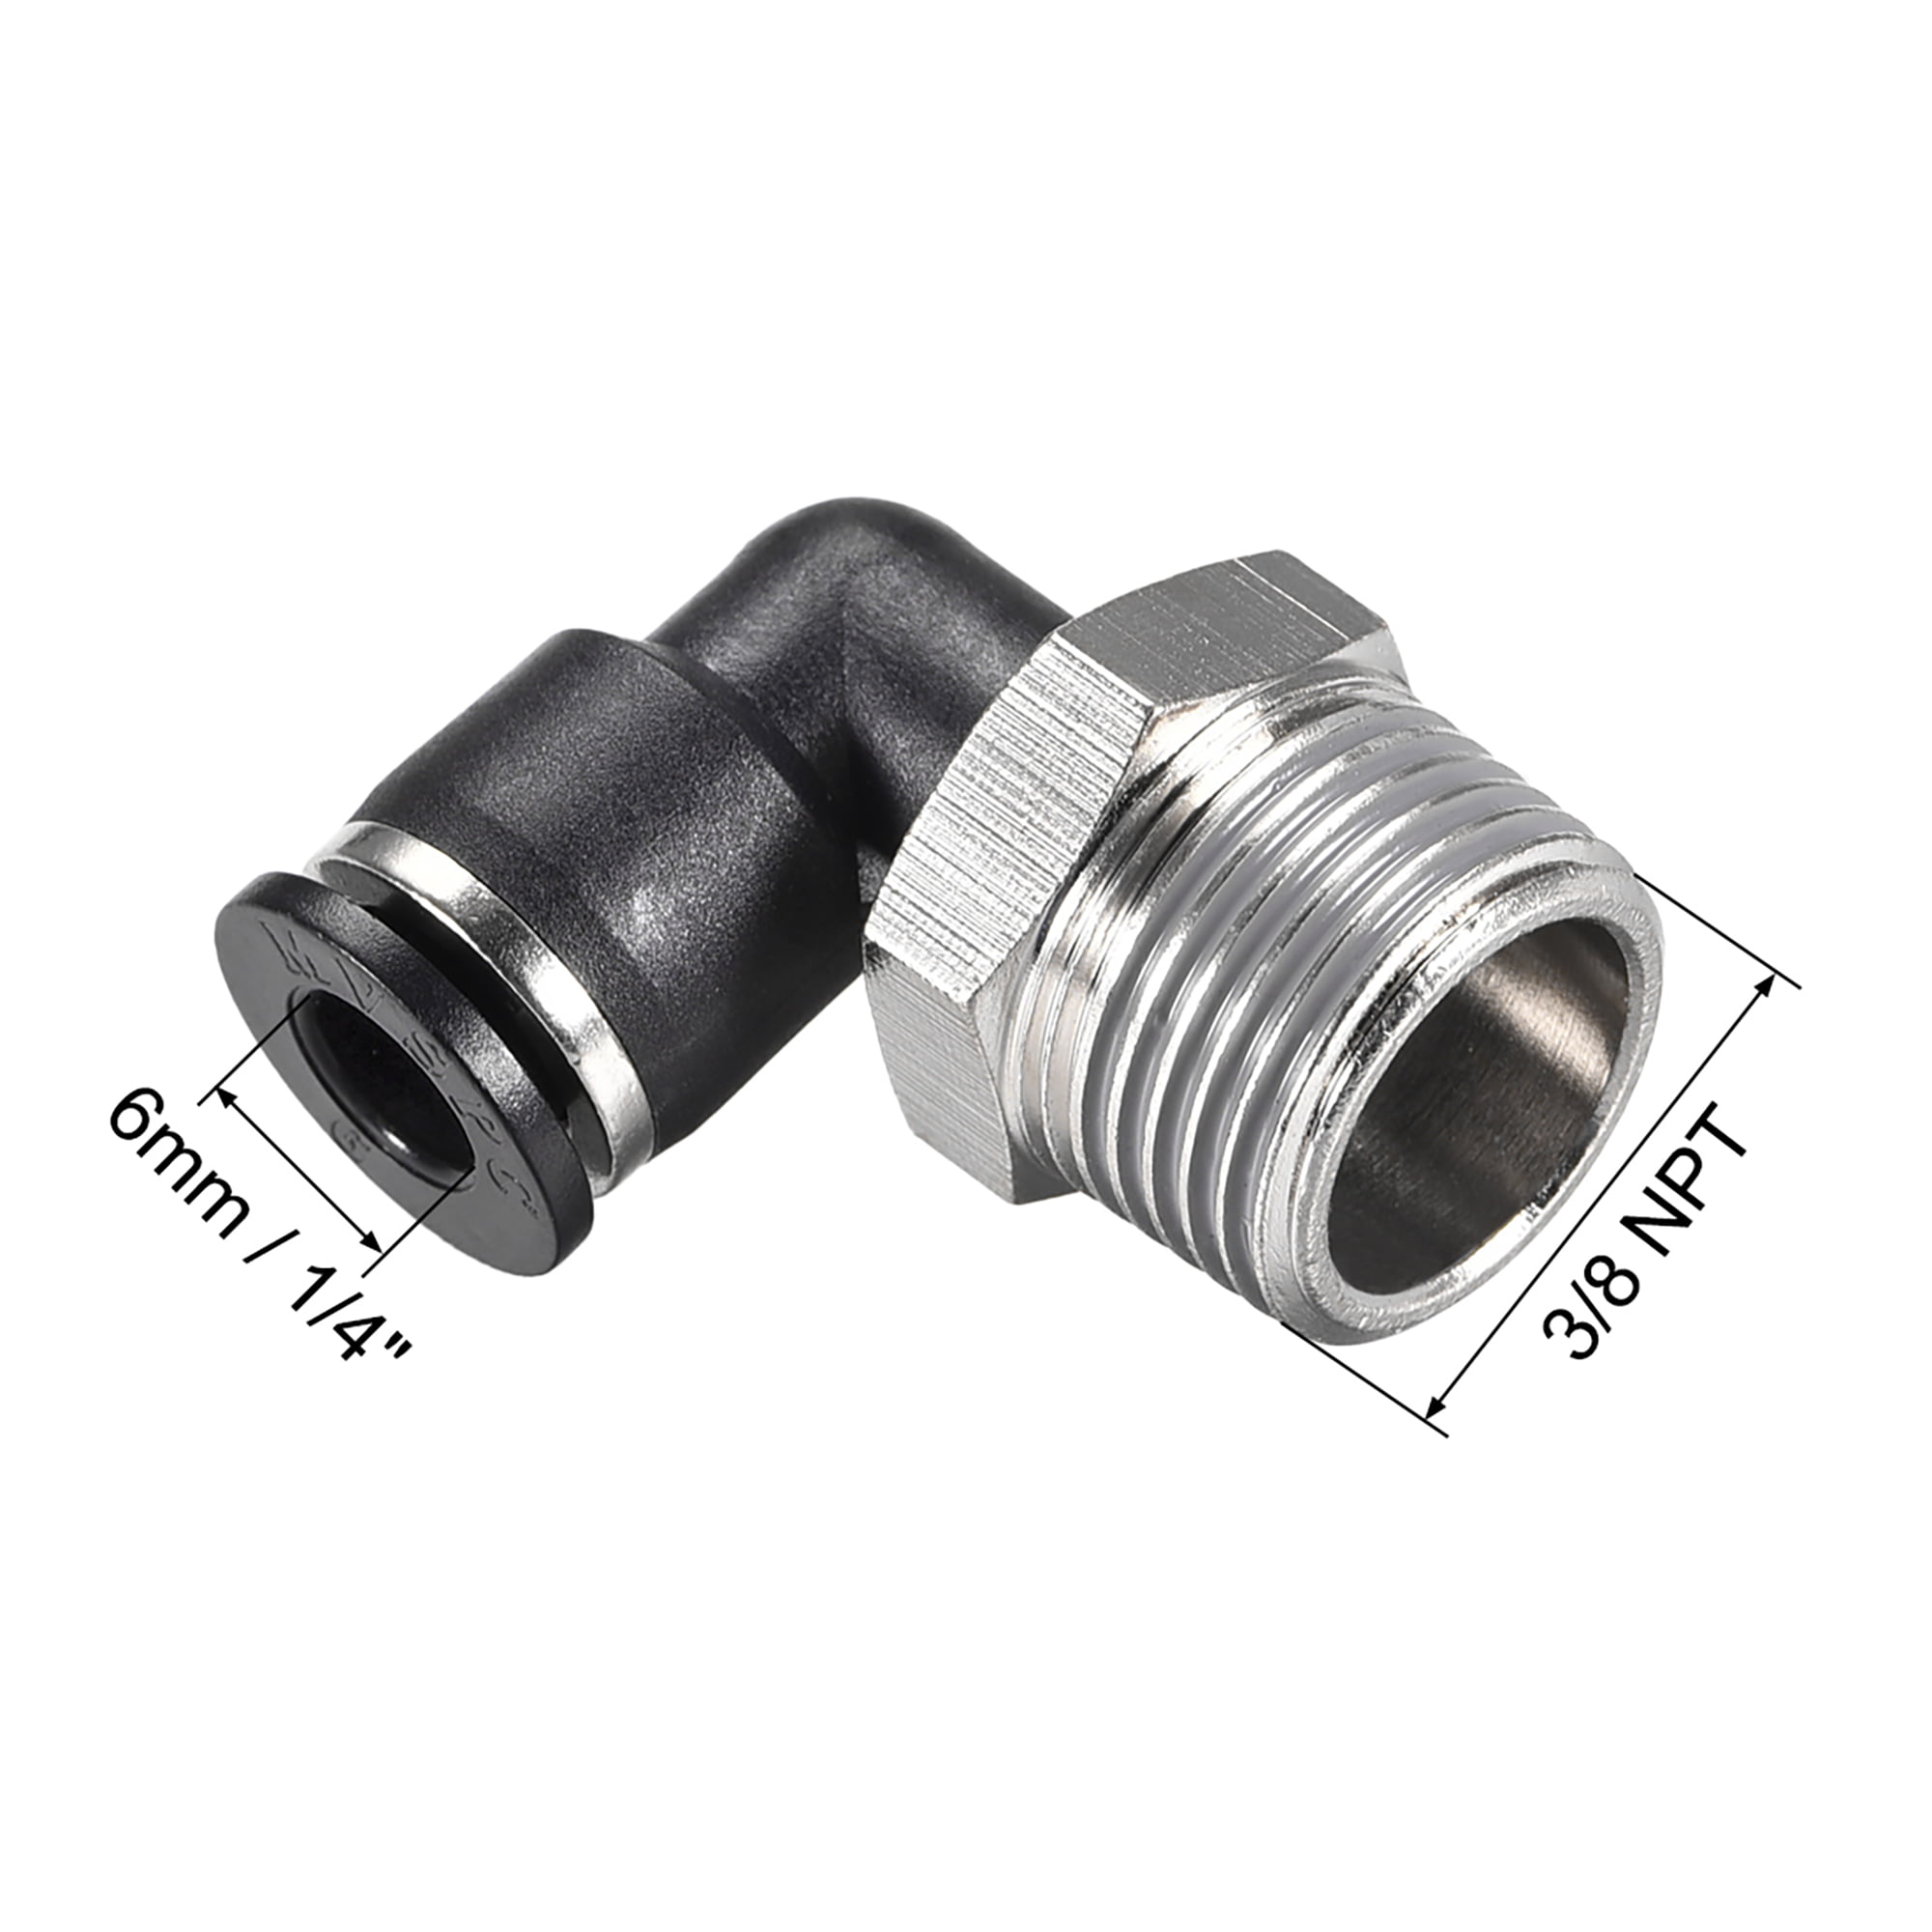 3/8" Pneumatic ELBOW Air Quick Fittings Pipe Joint Coupling 90 degree 